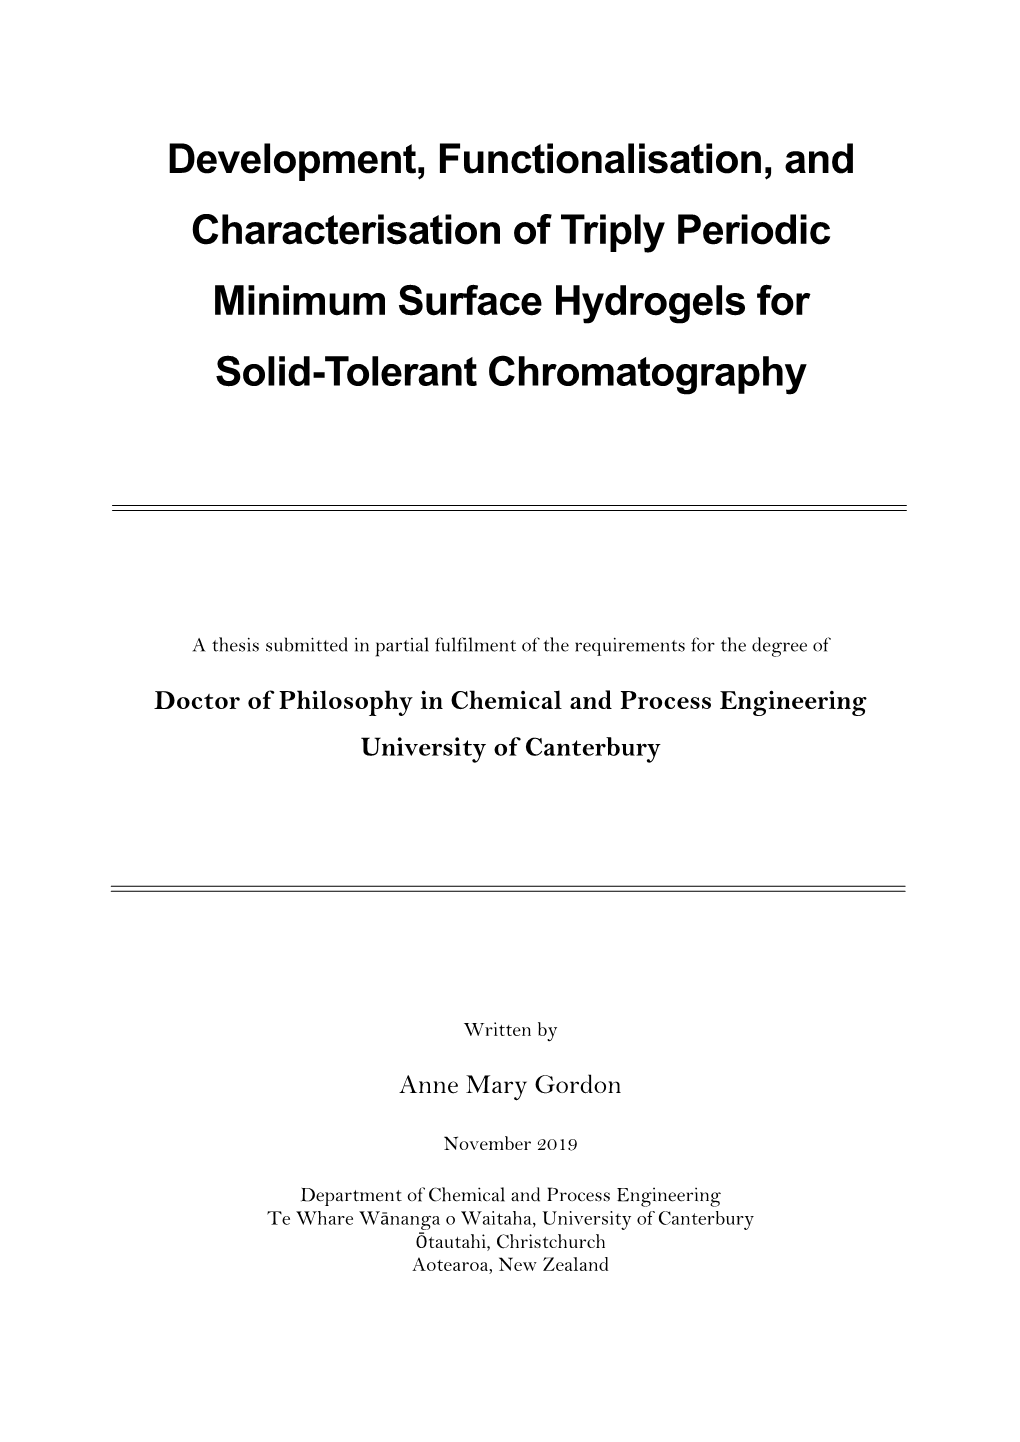 Development, Functionalisation, and Characterisation of Triply Periodic Minimum Surface Hydrogels for Solid-Tolerant Chromatography